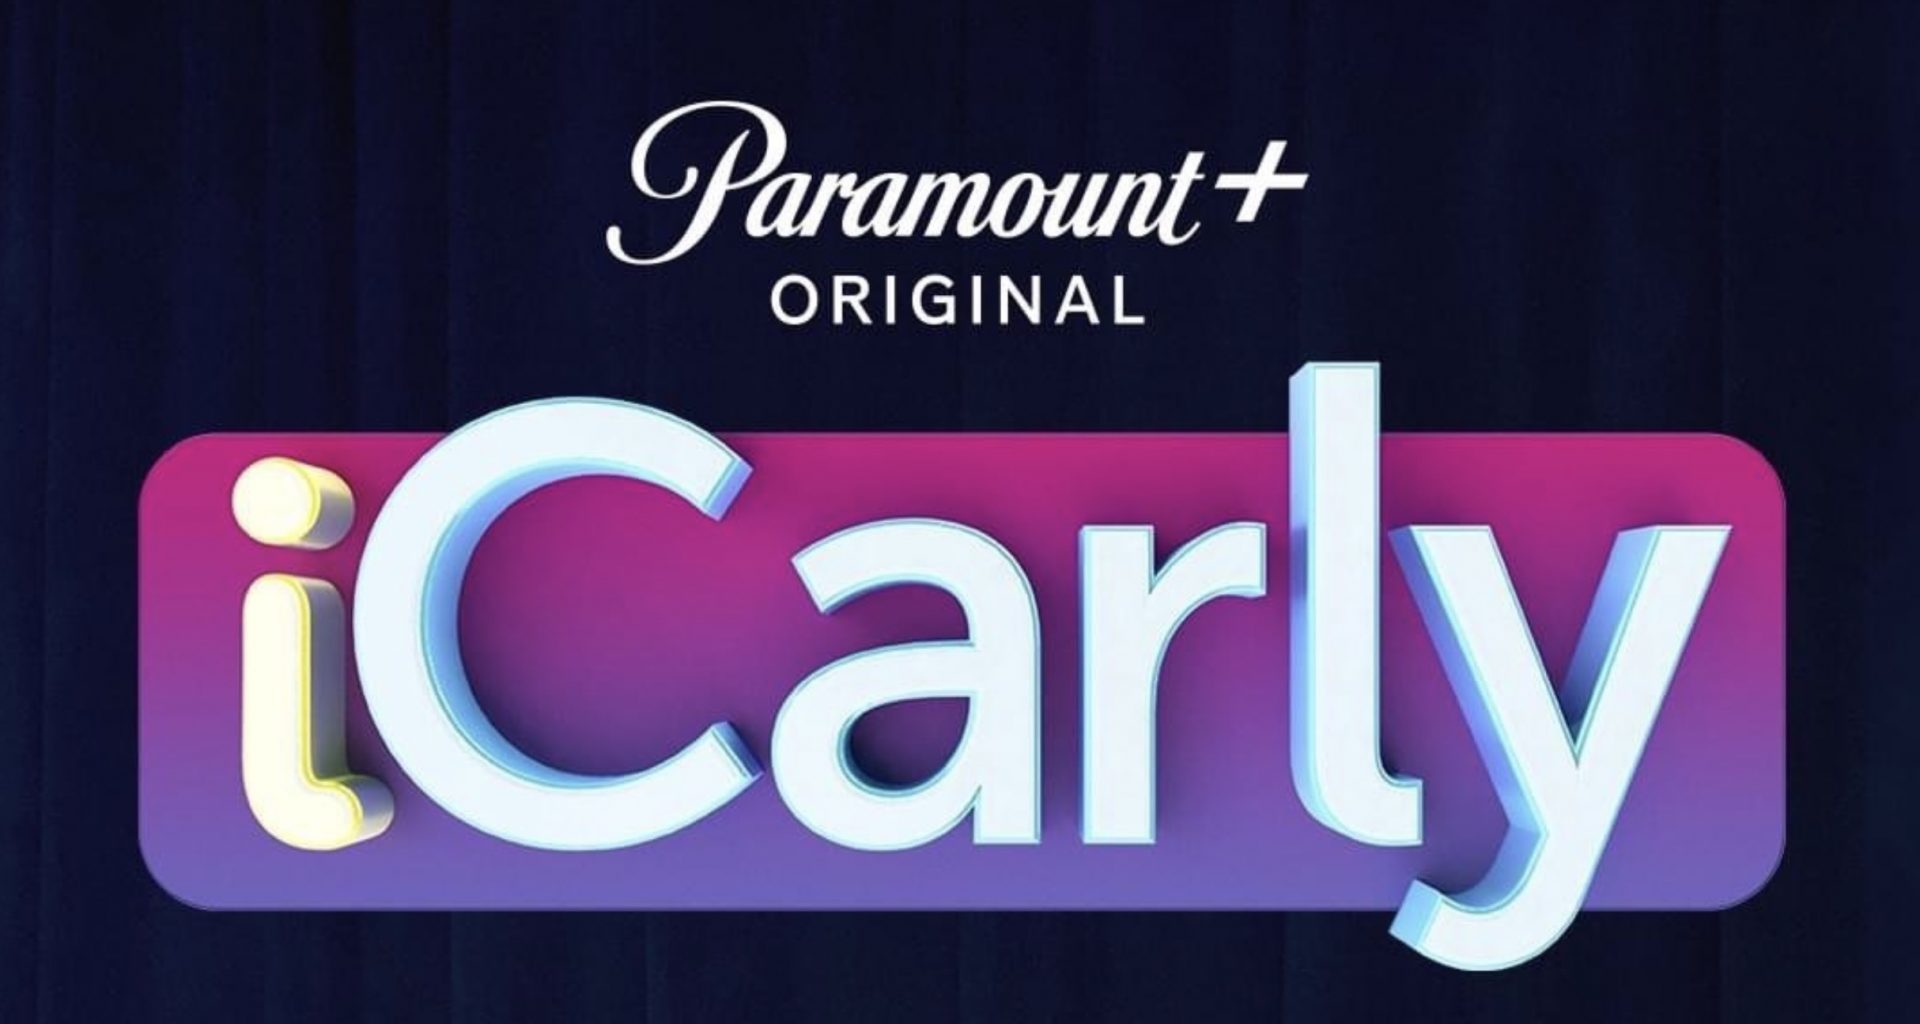 icarly reboot episode 4 release date